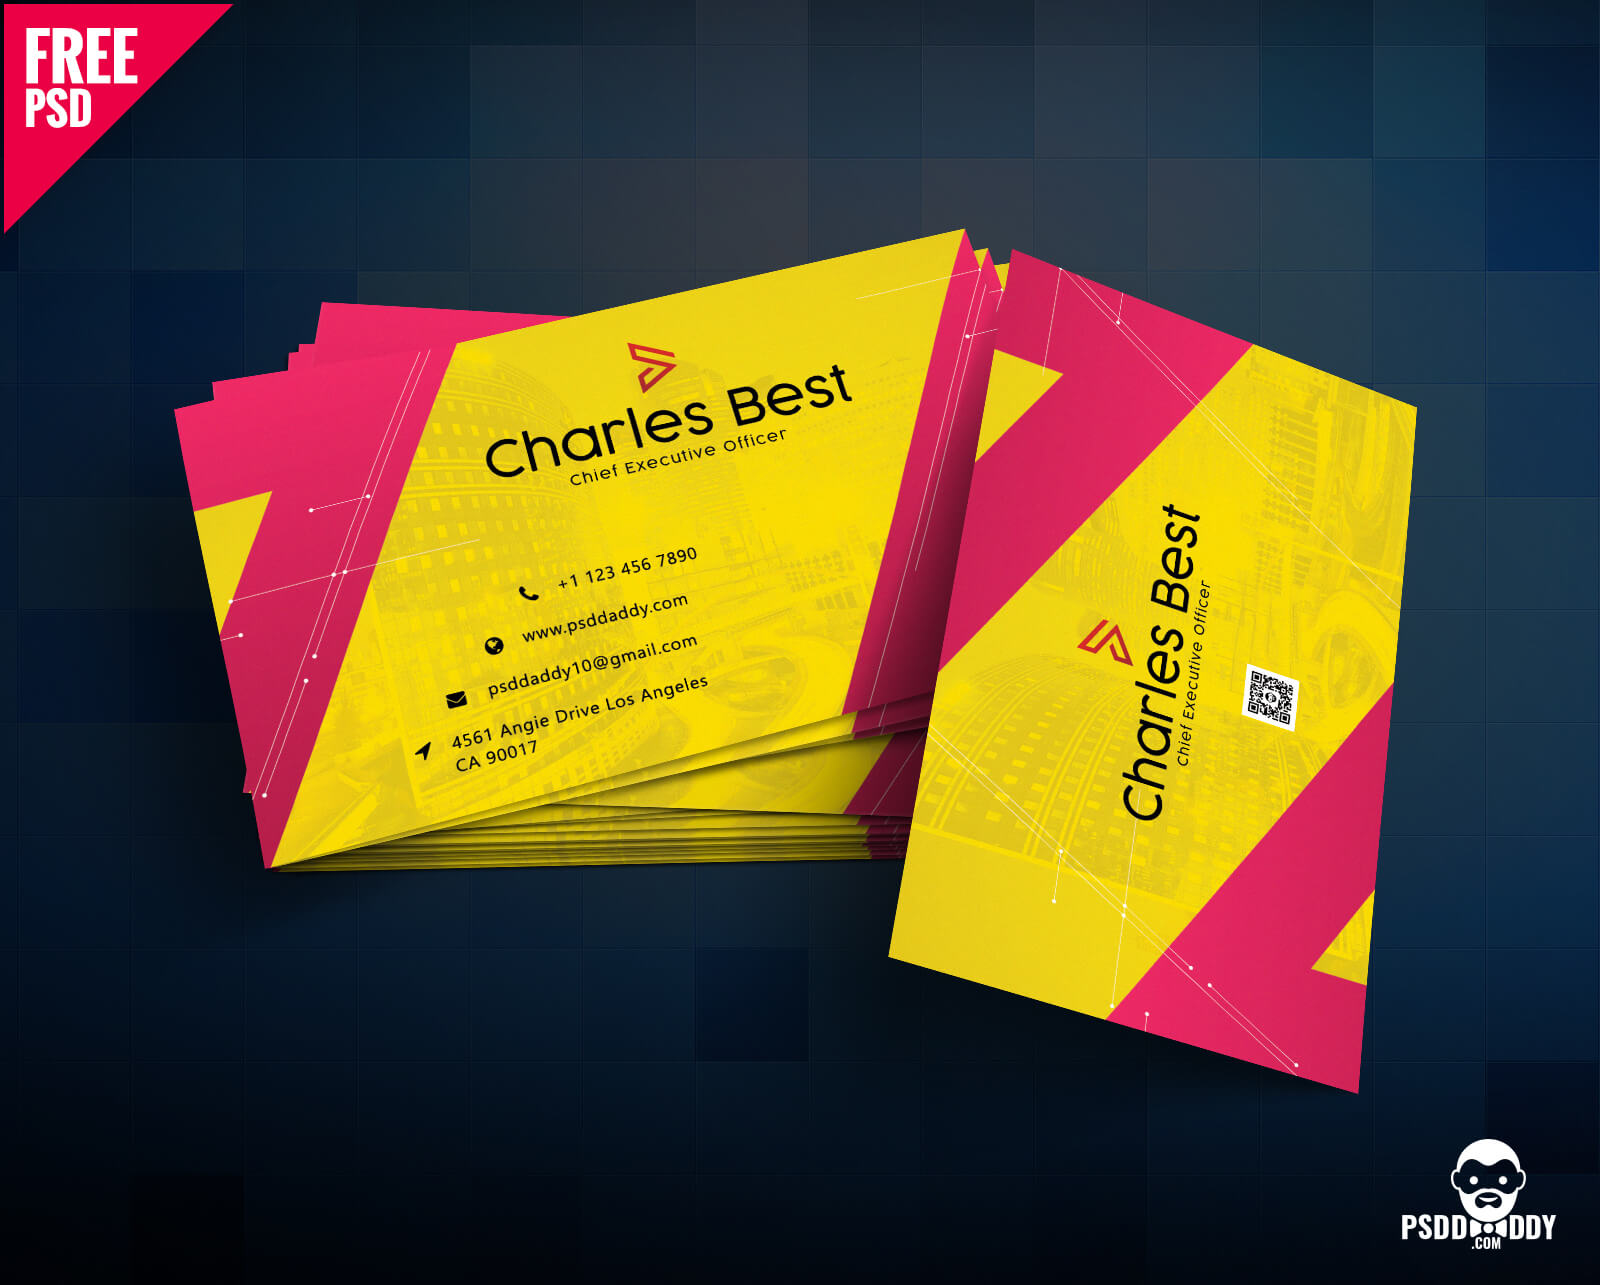 Download] Creative Business Card Free Psd | Psddaddy For Visiting Card Psd Template